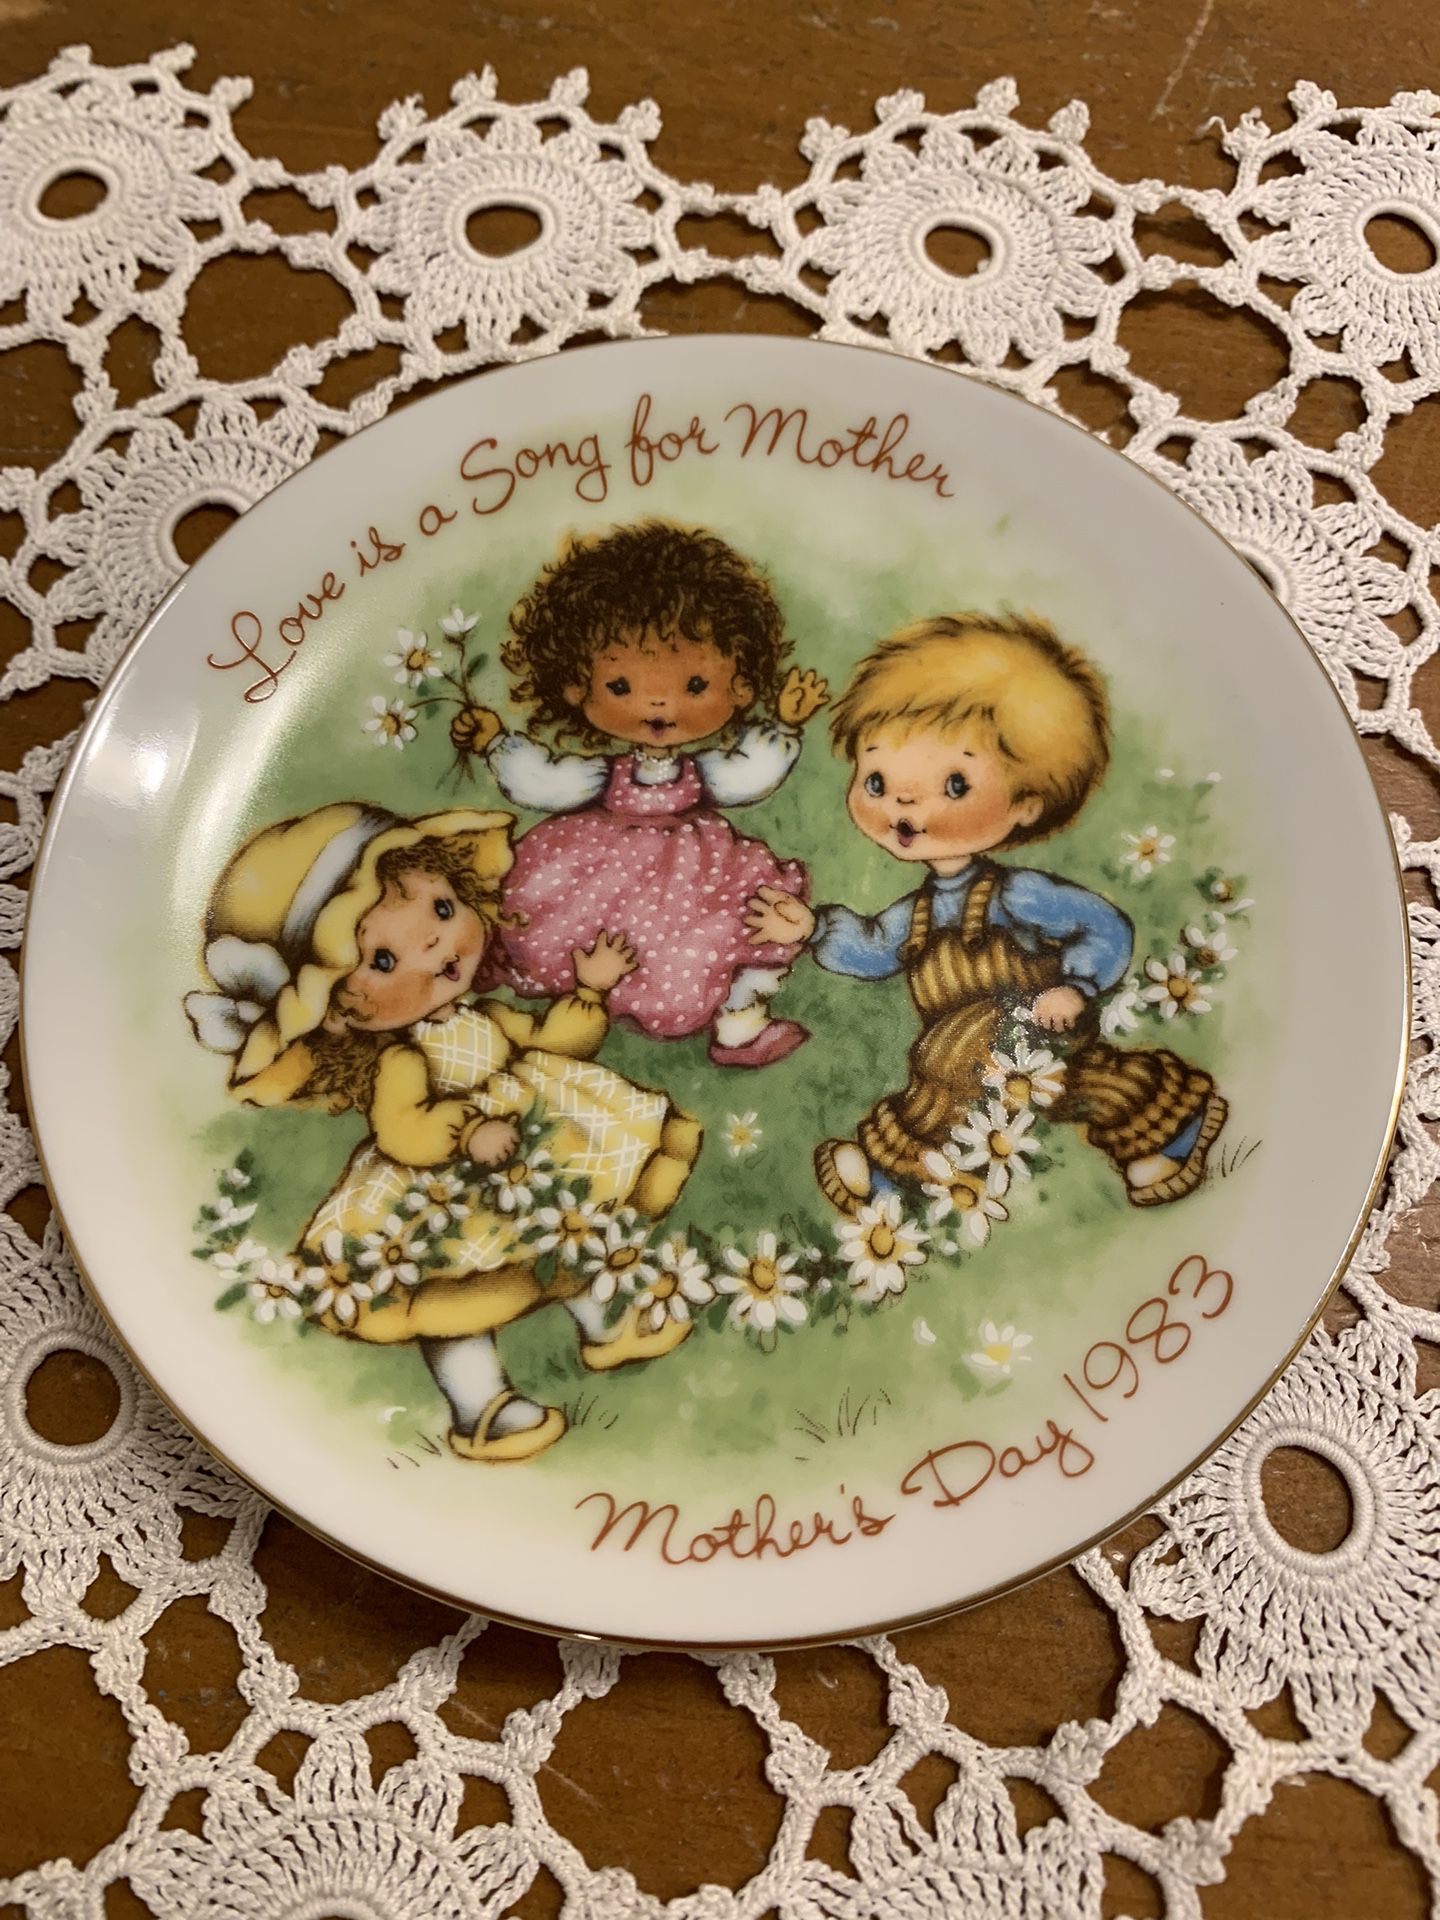 Vintage Avon 1983 Mother’s Day Plate “Love Is A Song”